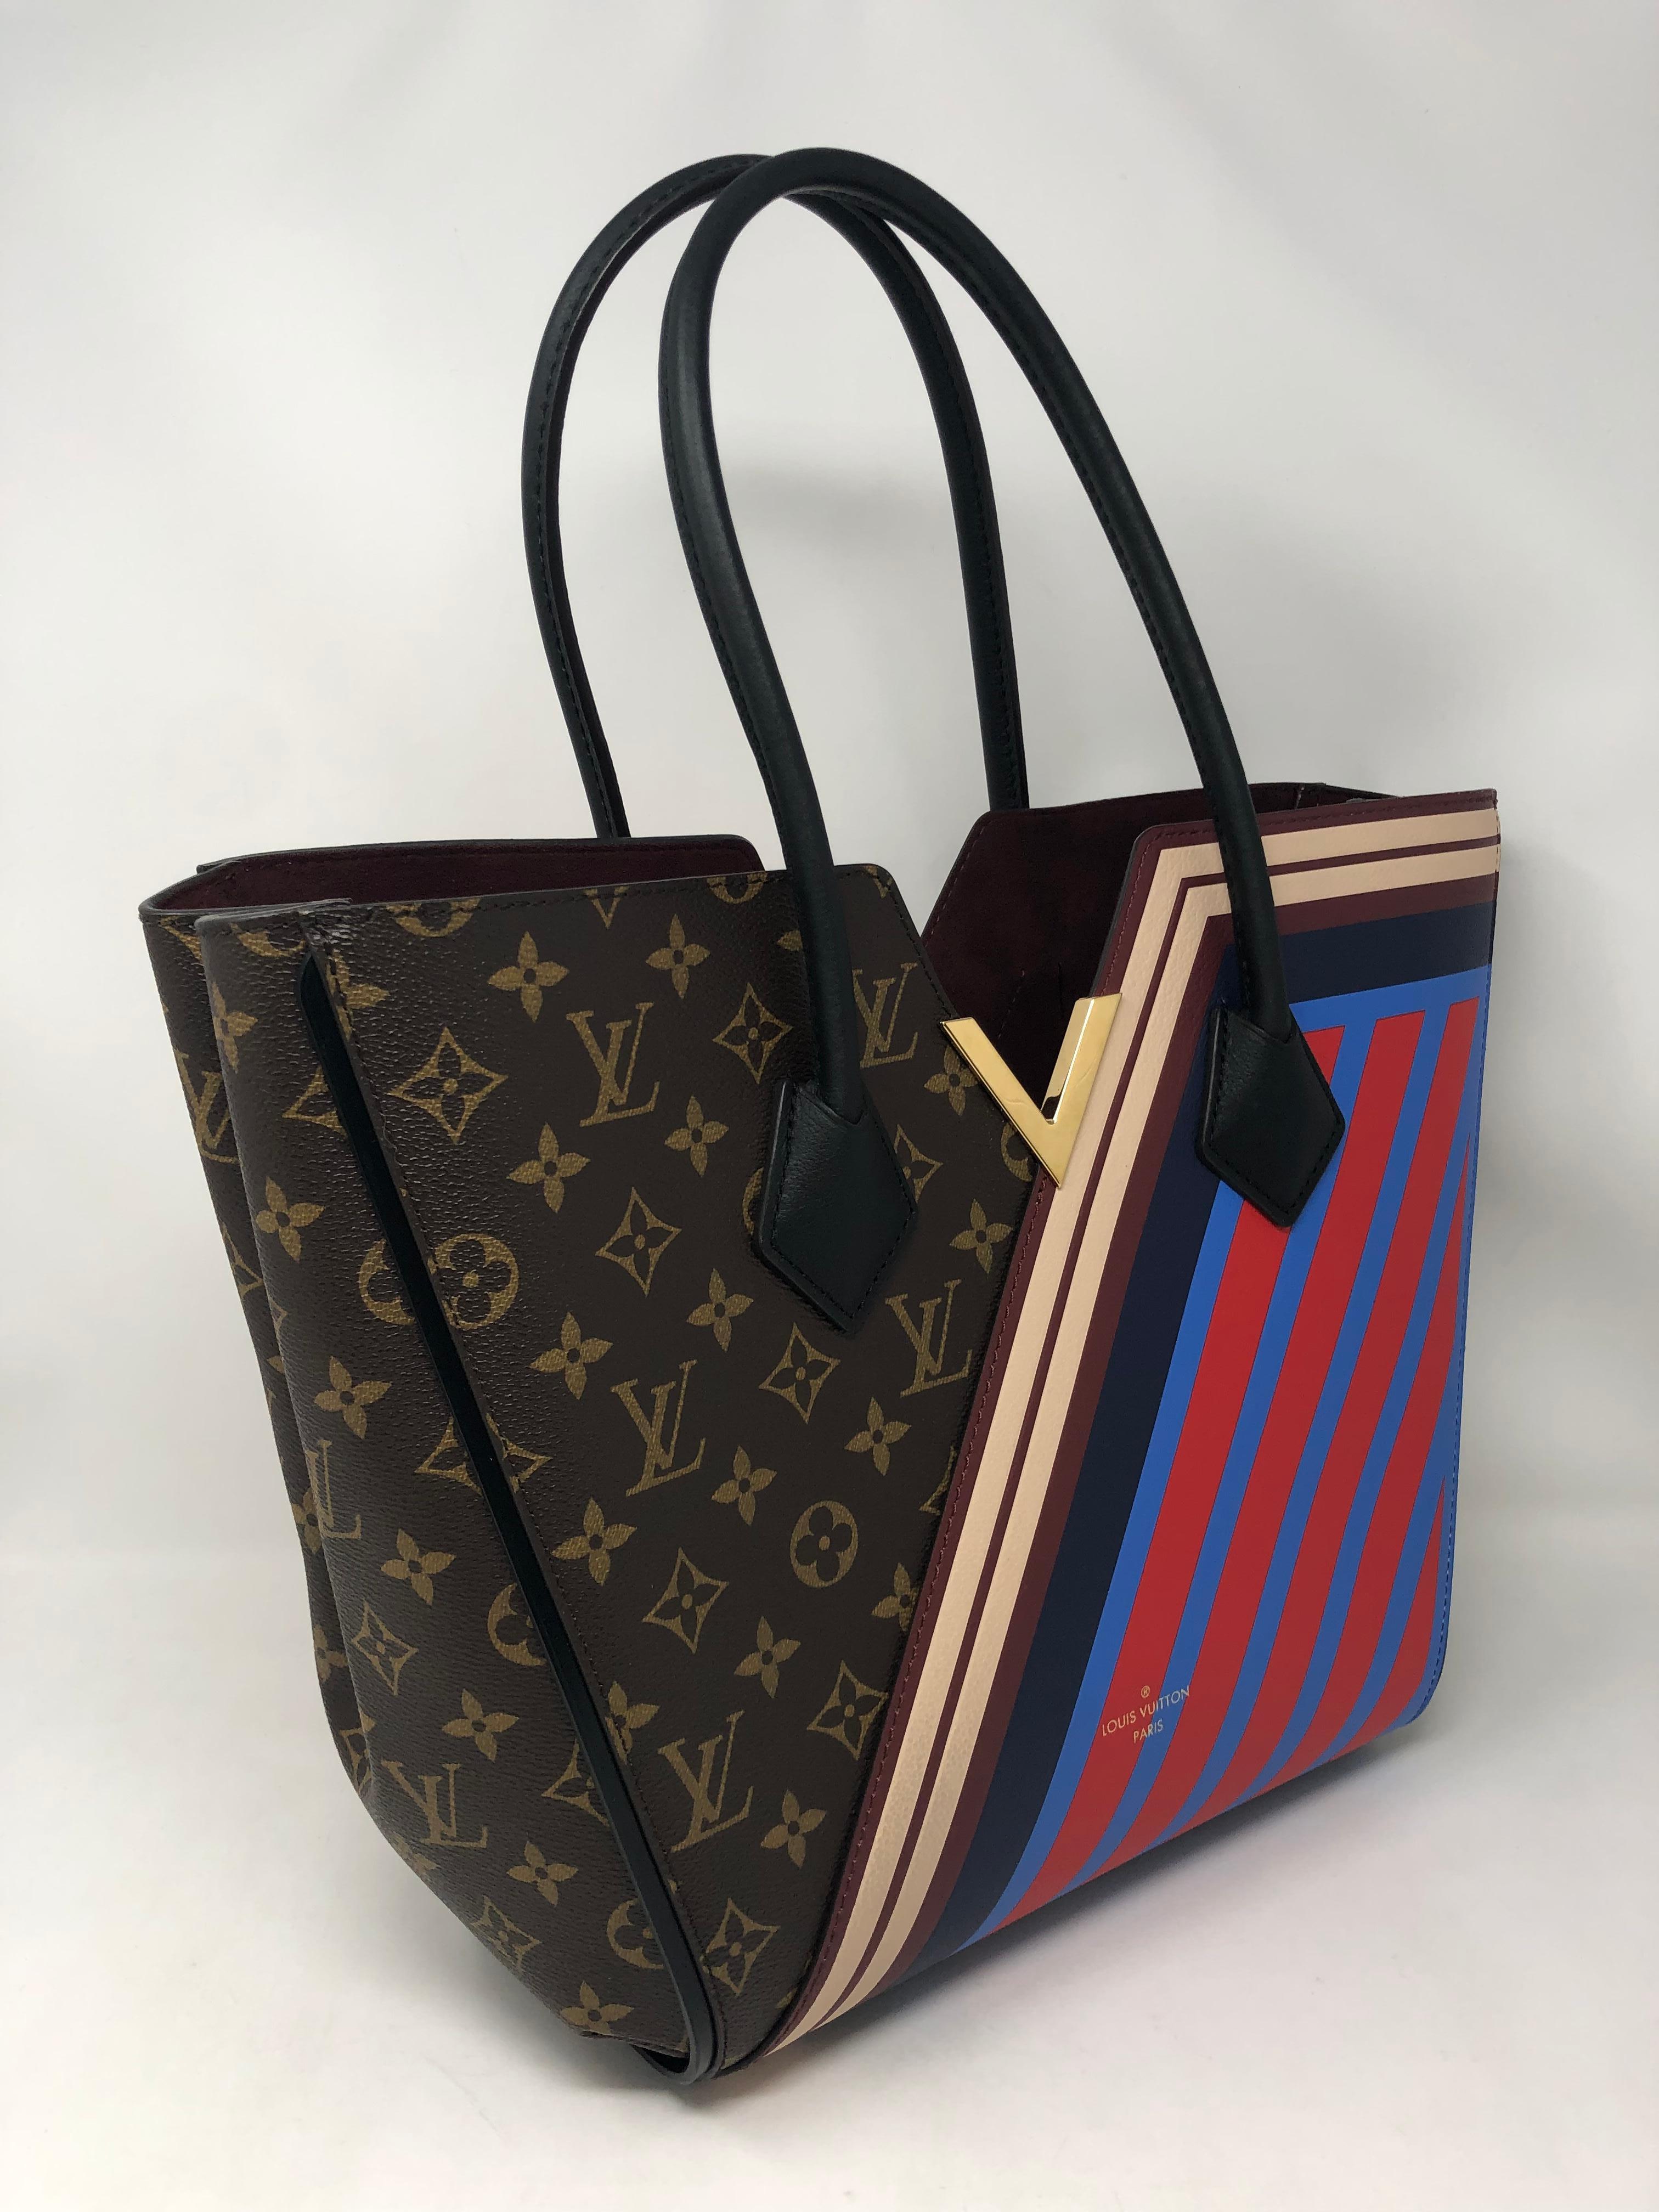 Louis Vuitton Kimono Bag Limited Edition. Monogram and red, blue stripes on this bag. Rare and in brand new condition. Unique look and highly coveted. Guaranteed authentic. 